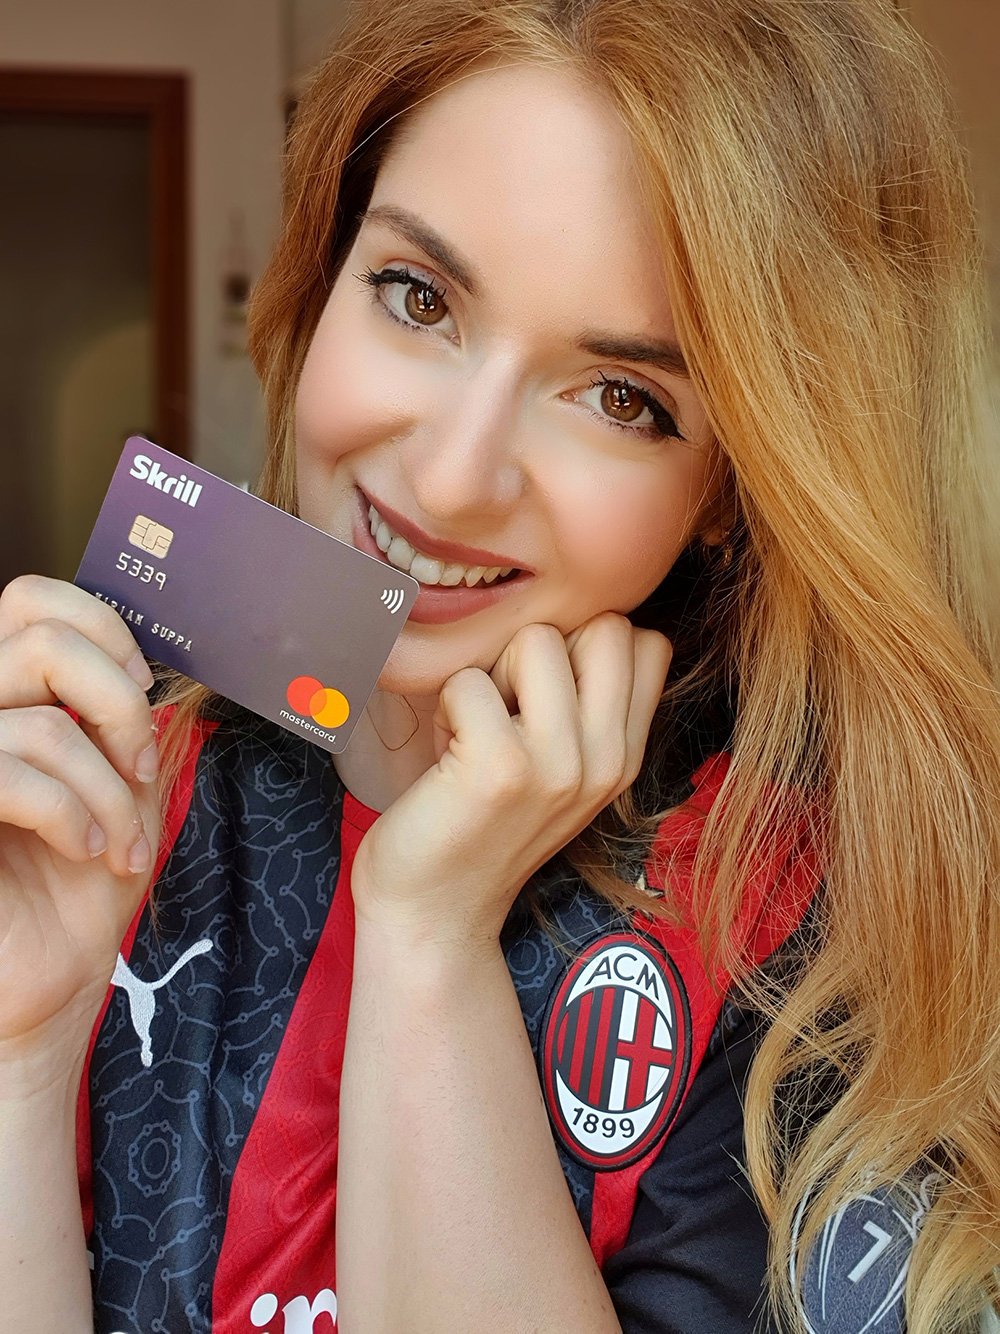 Miriam Suppa holds her Skrill Card, which she used to pay for her kit.